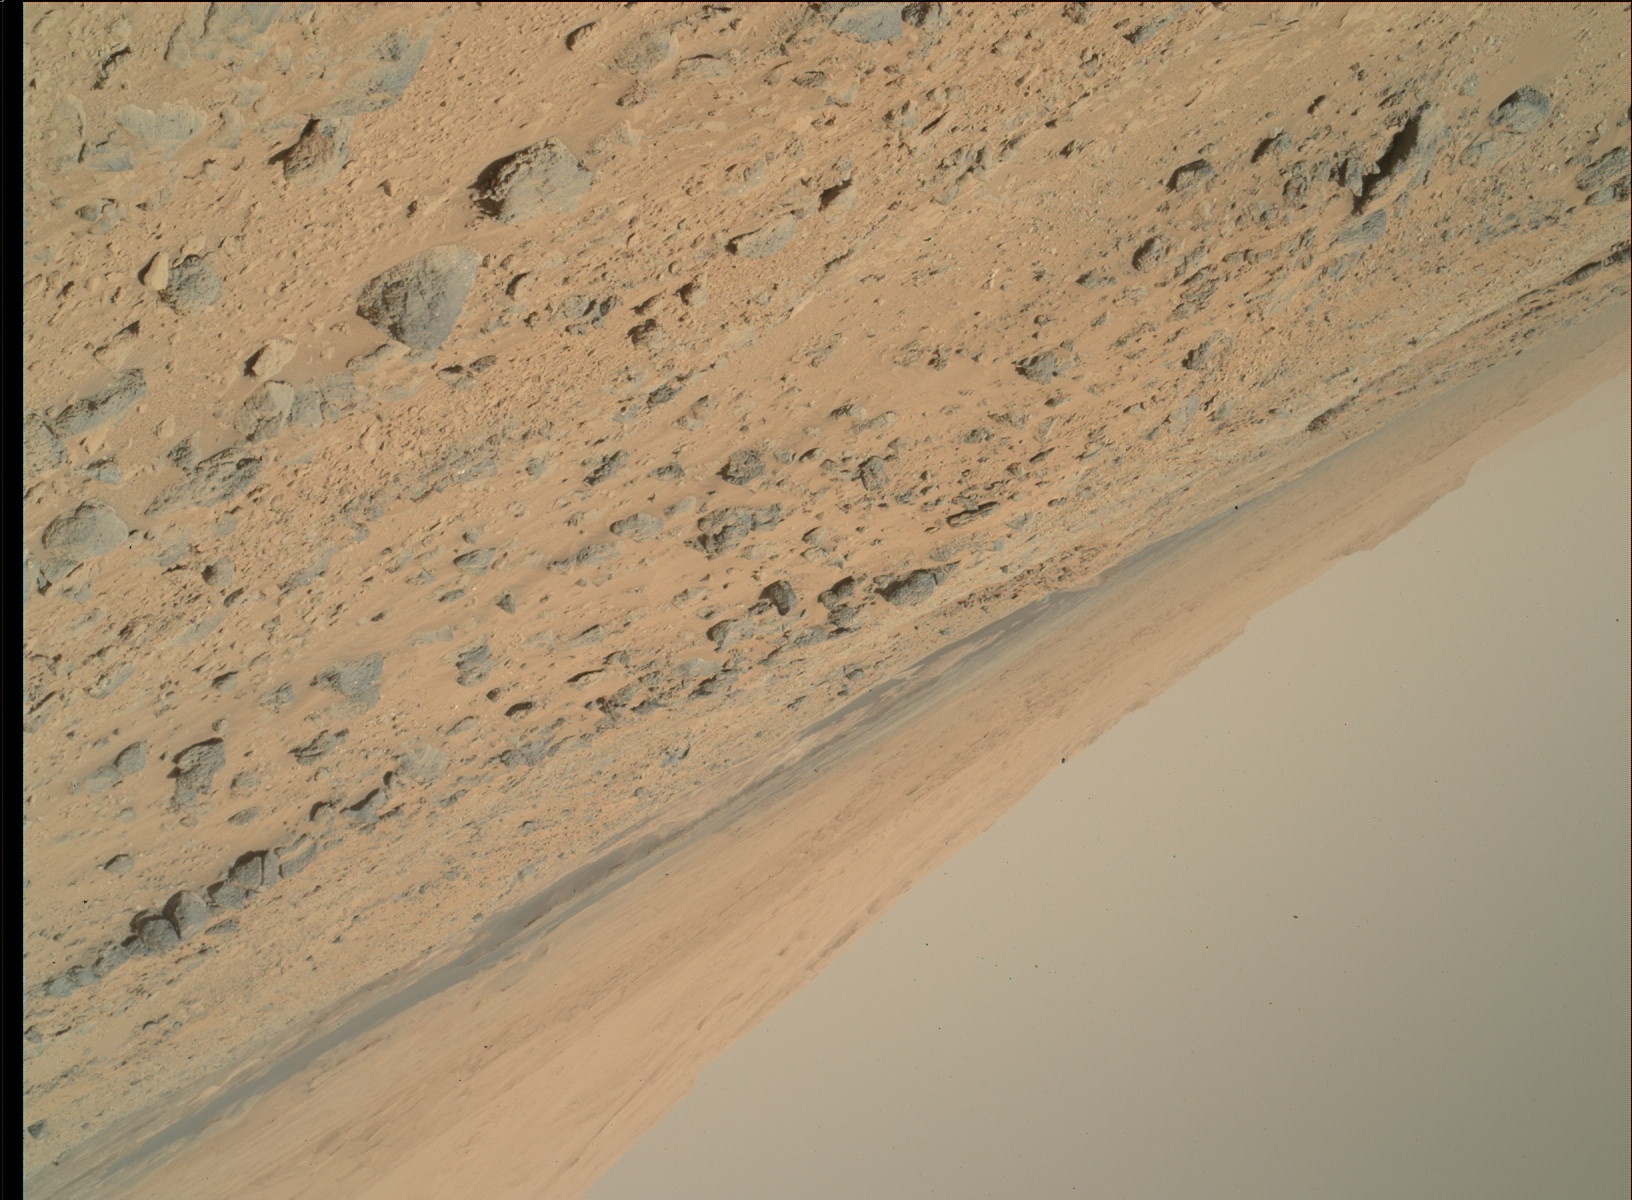 Nasa's Mars rover Curiosity acquired this image using its Mars Hand Lens Imager (MAHLI) on Sol 465